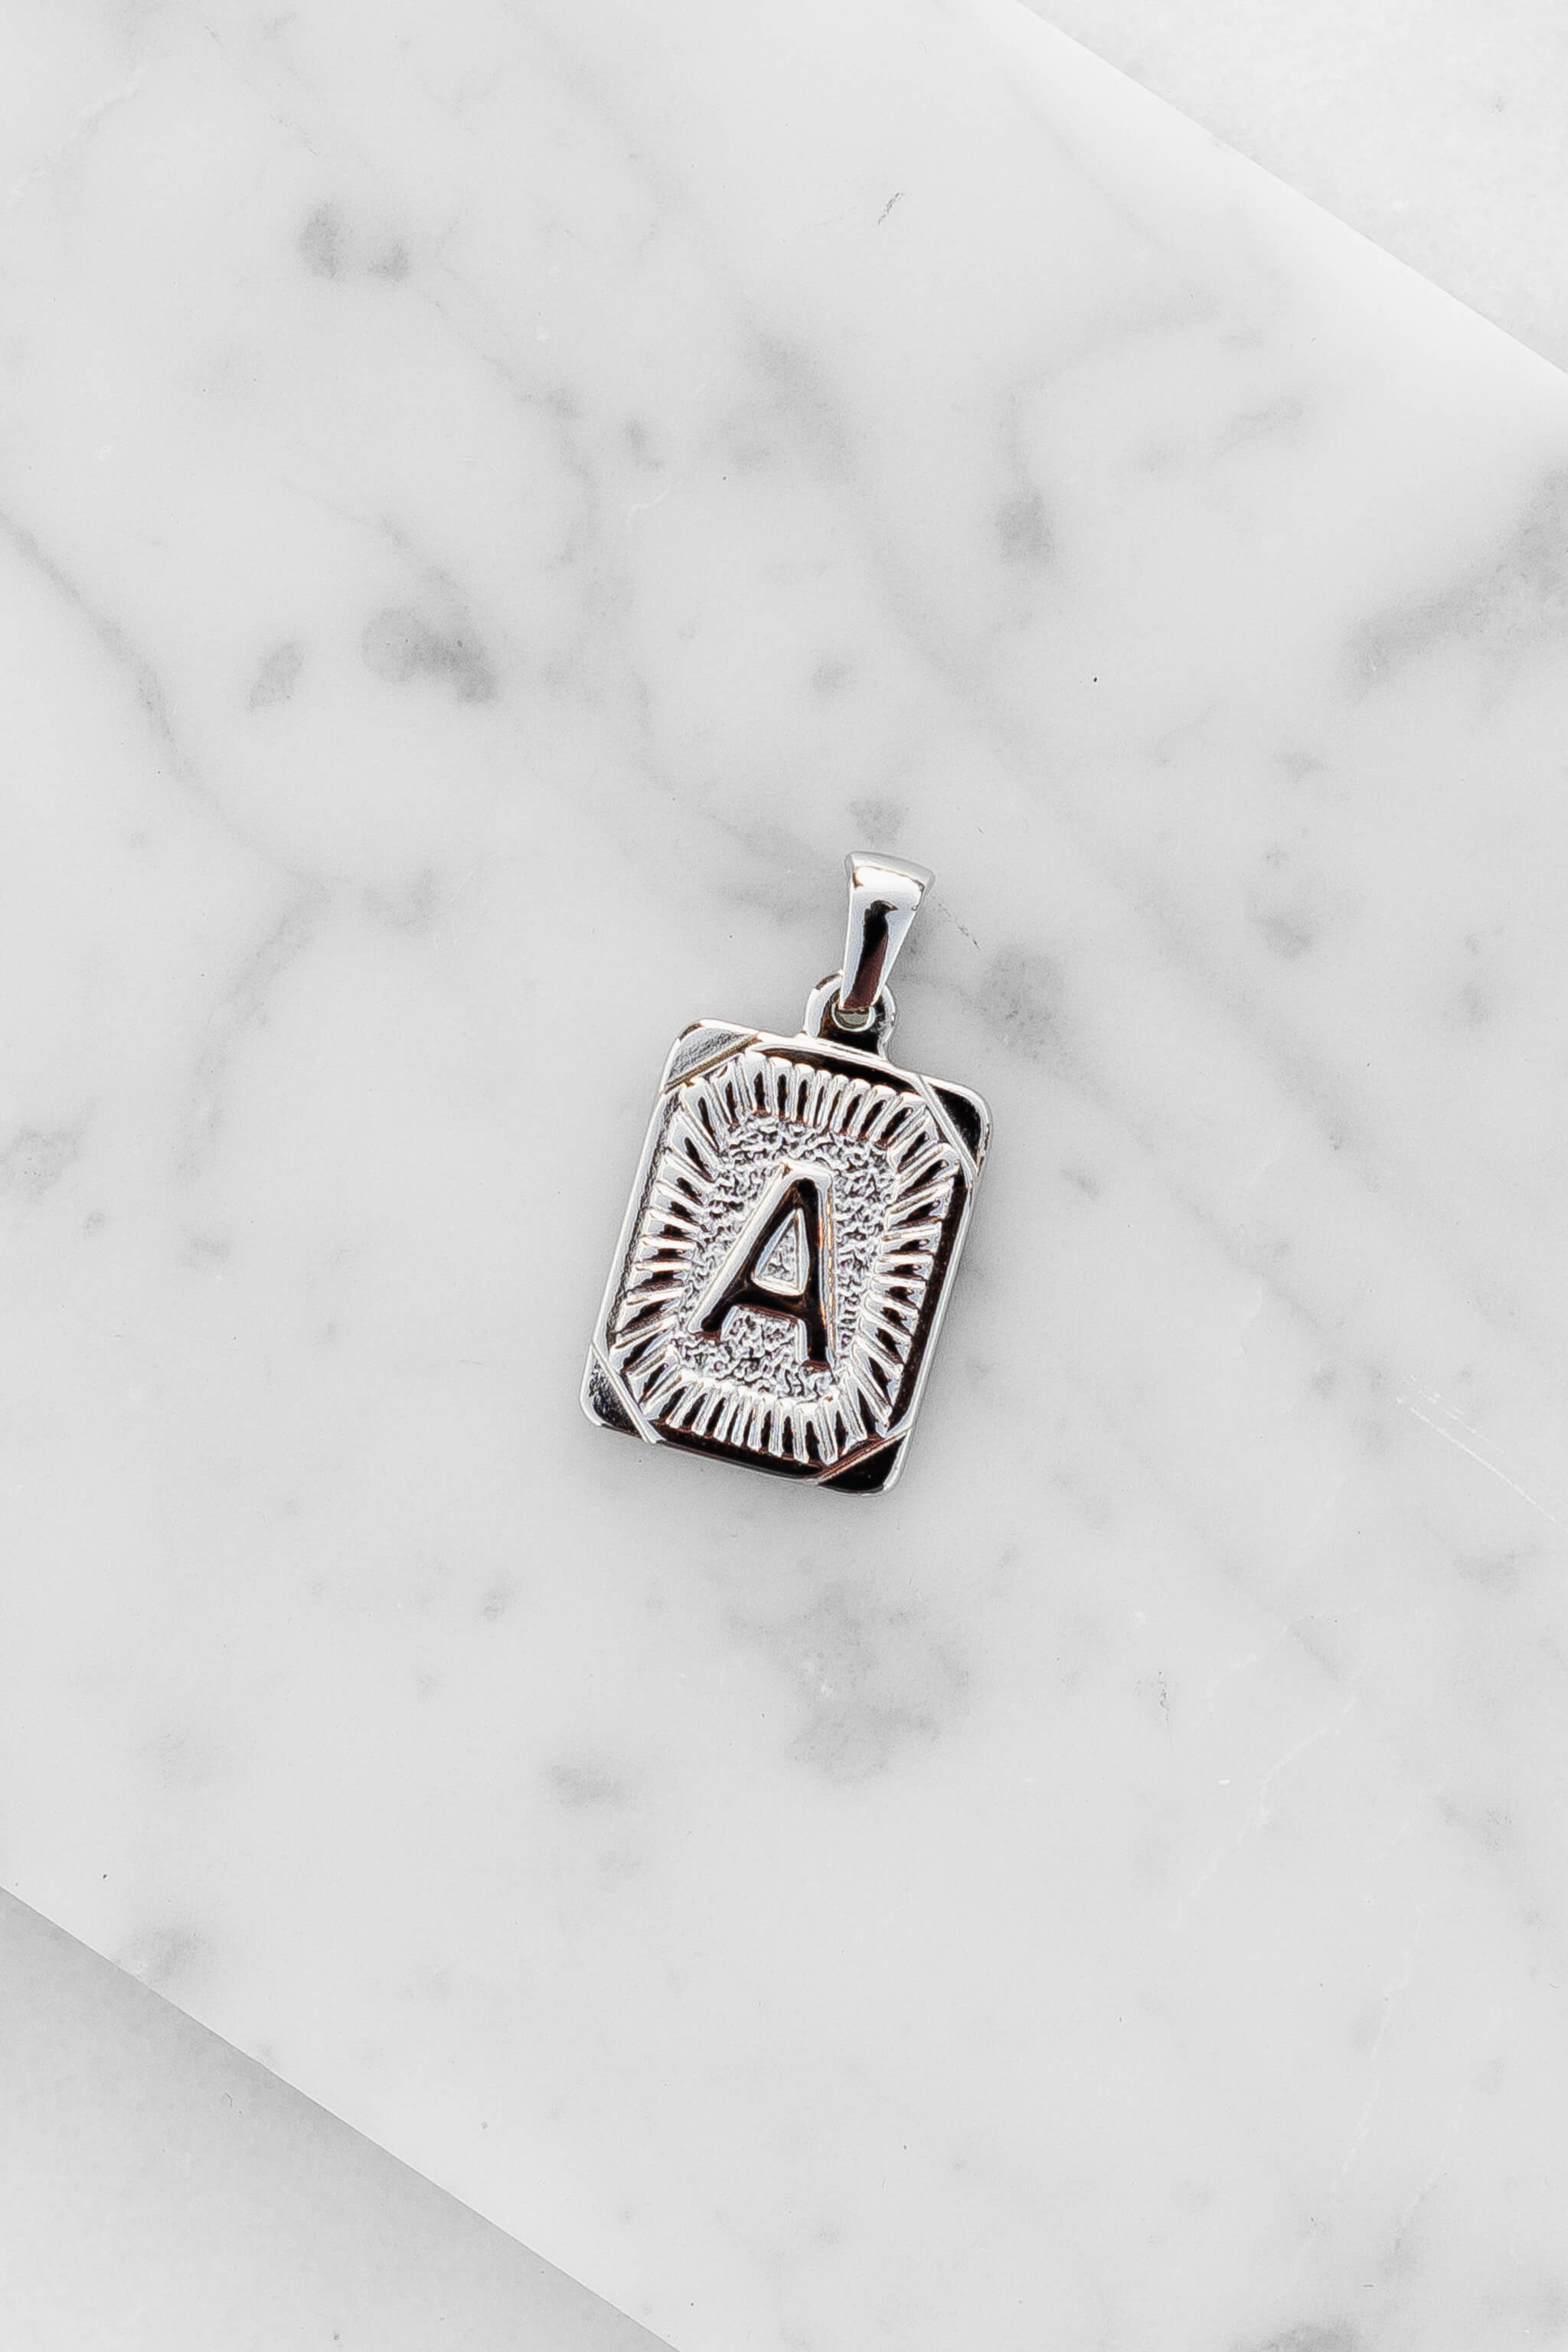 Silver Monogram Letter "A" Charm laying on a marble